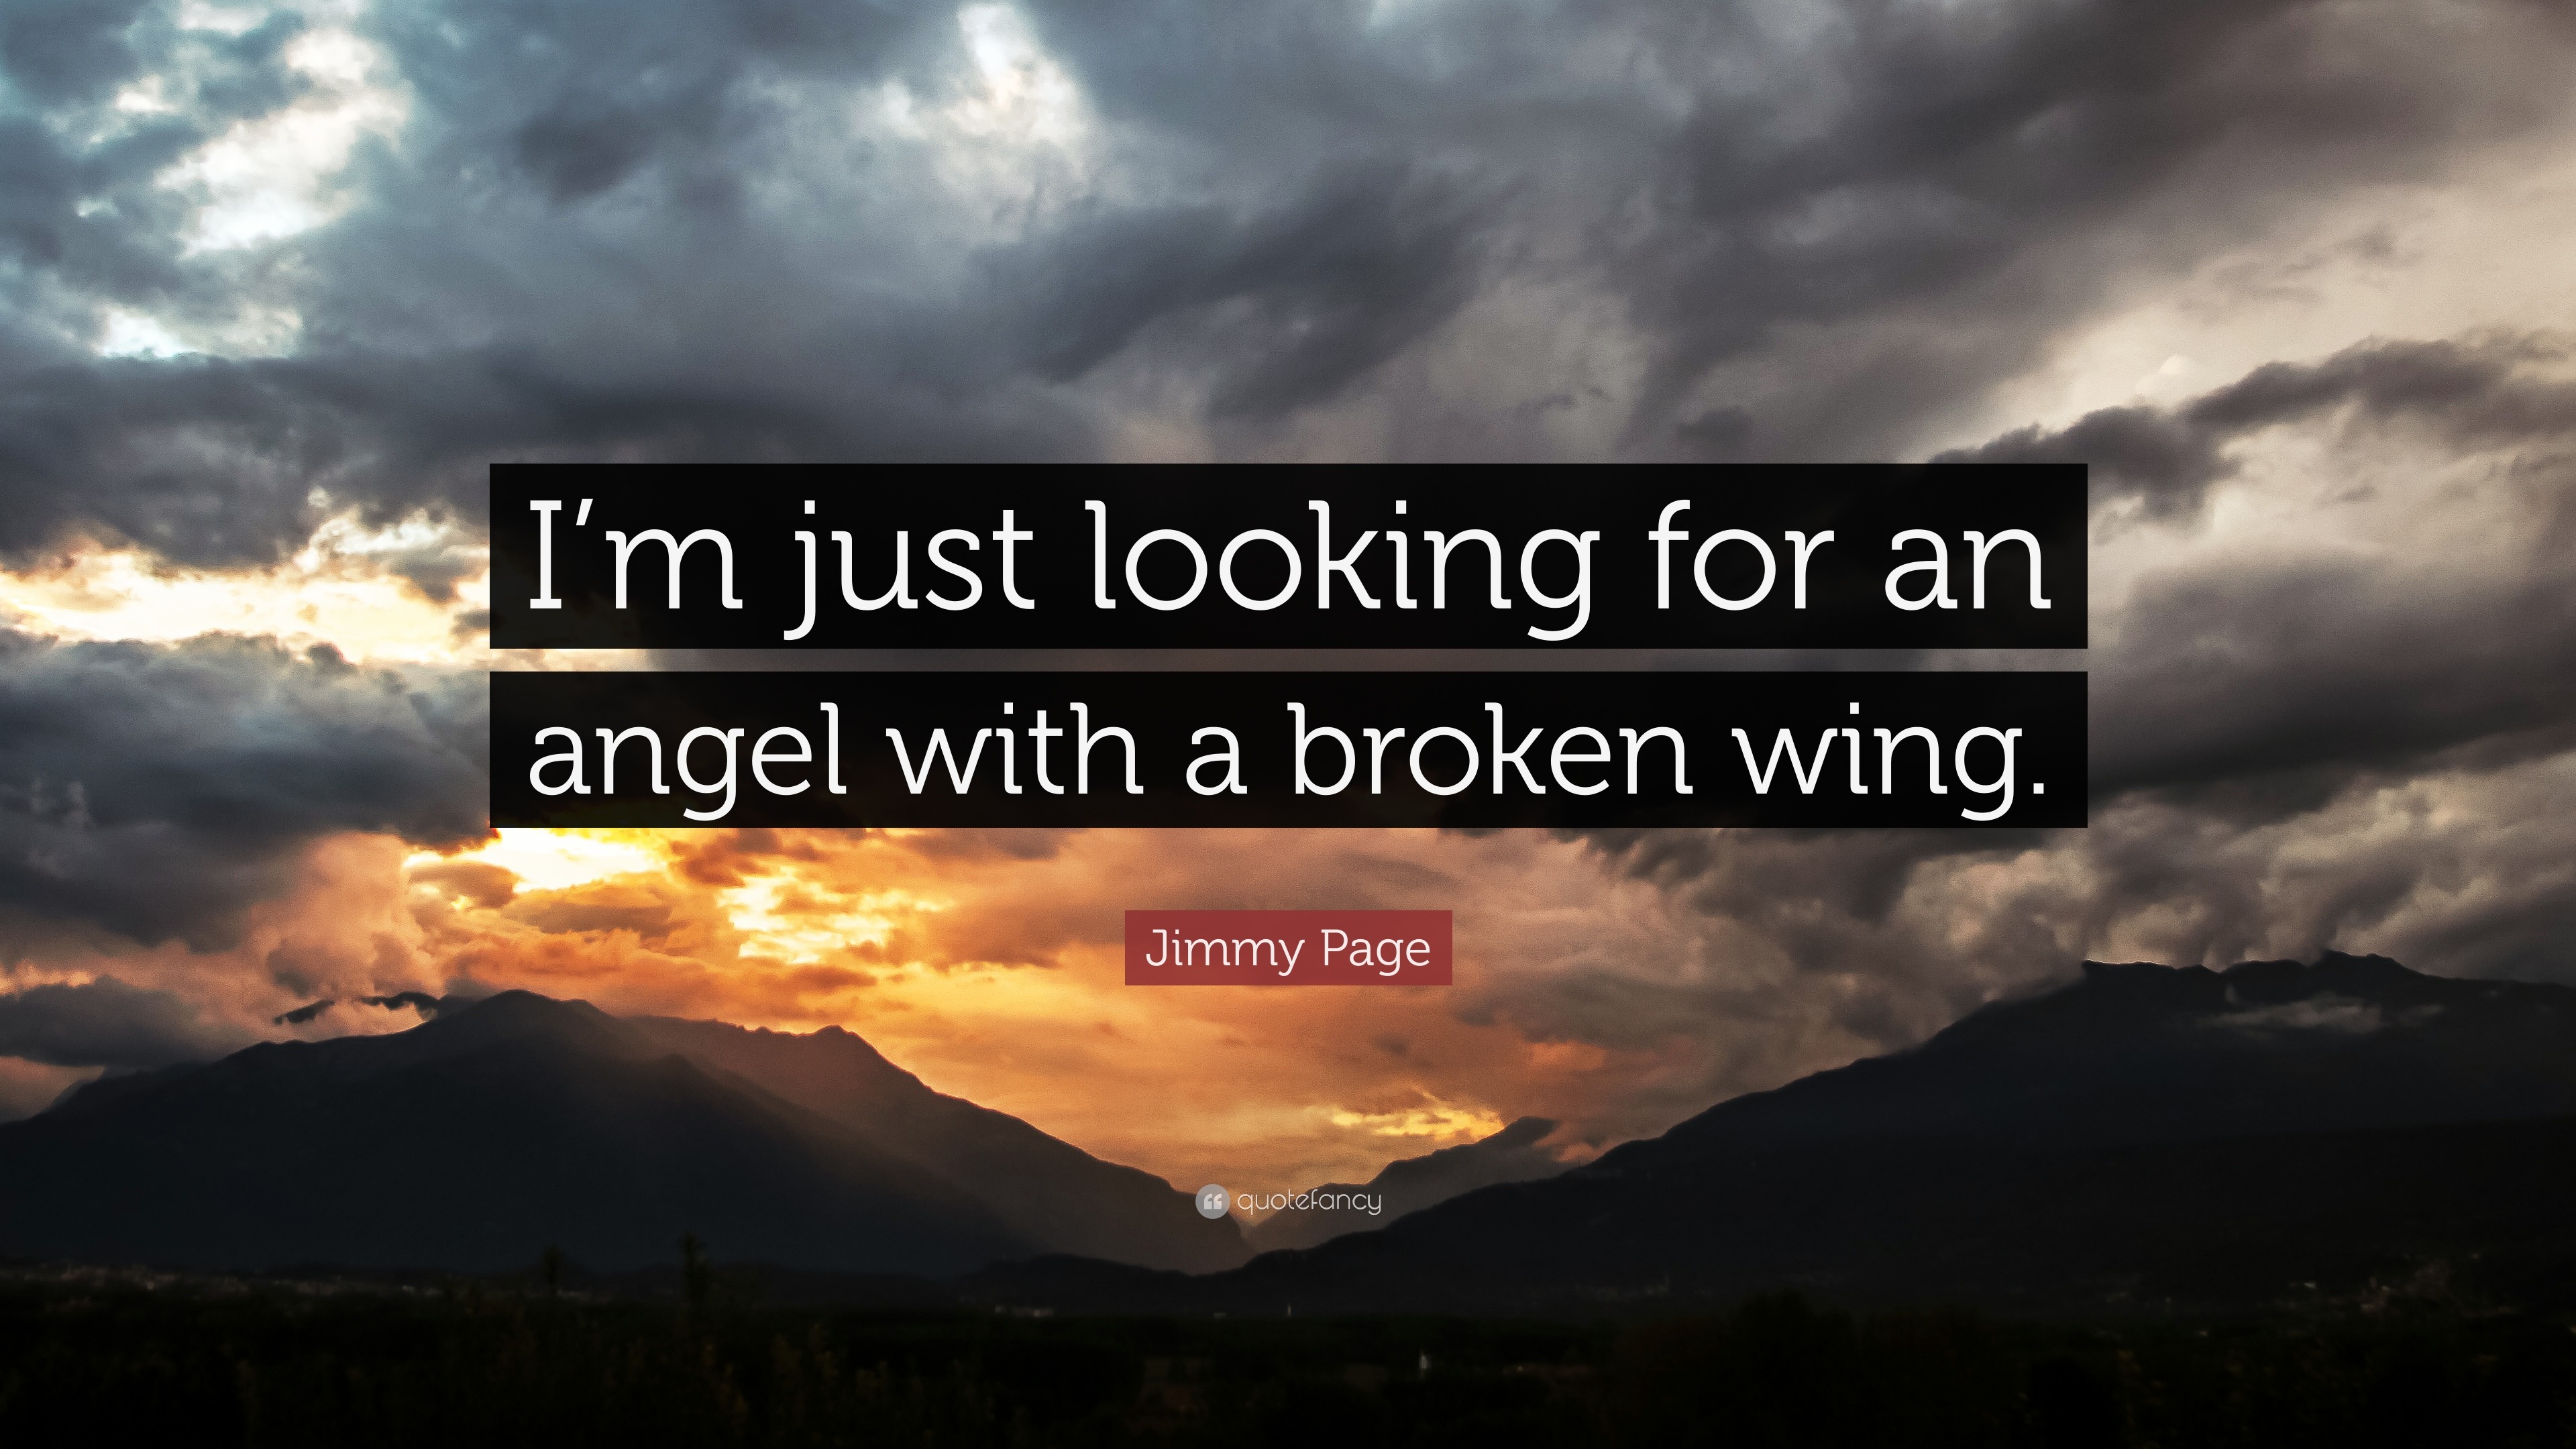 3840x2160 Jimmy Page Quote: “I'm just looking for an angel with a broken